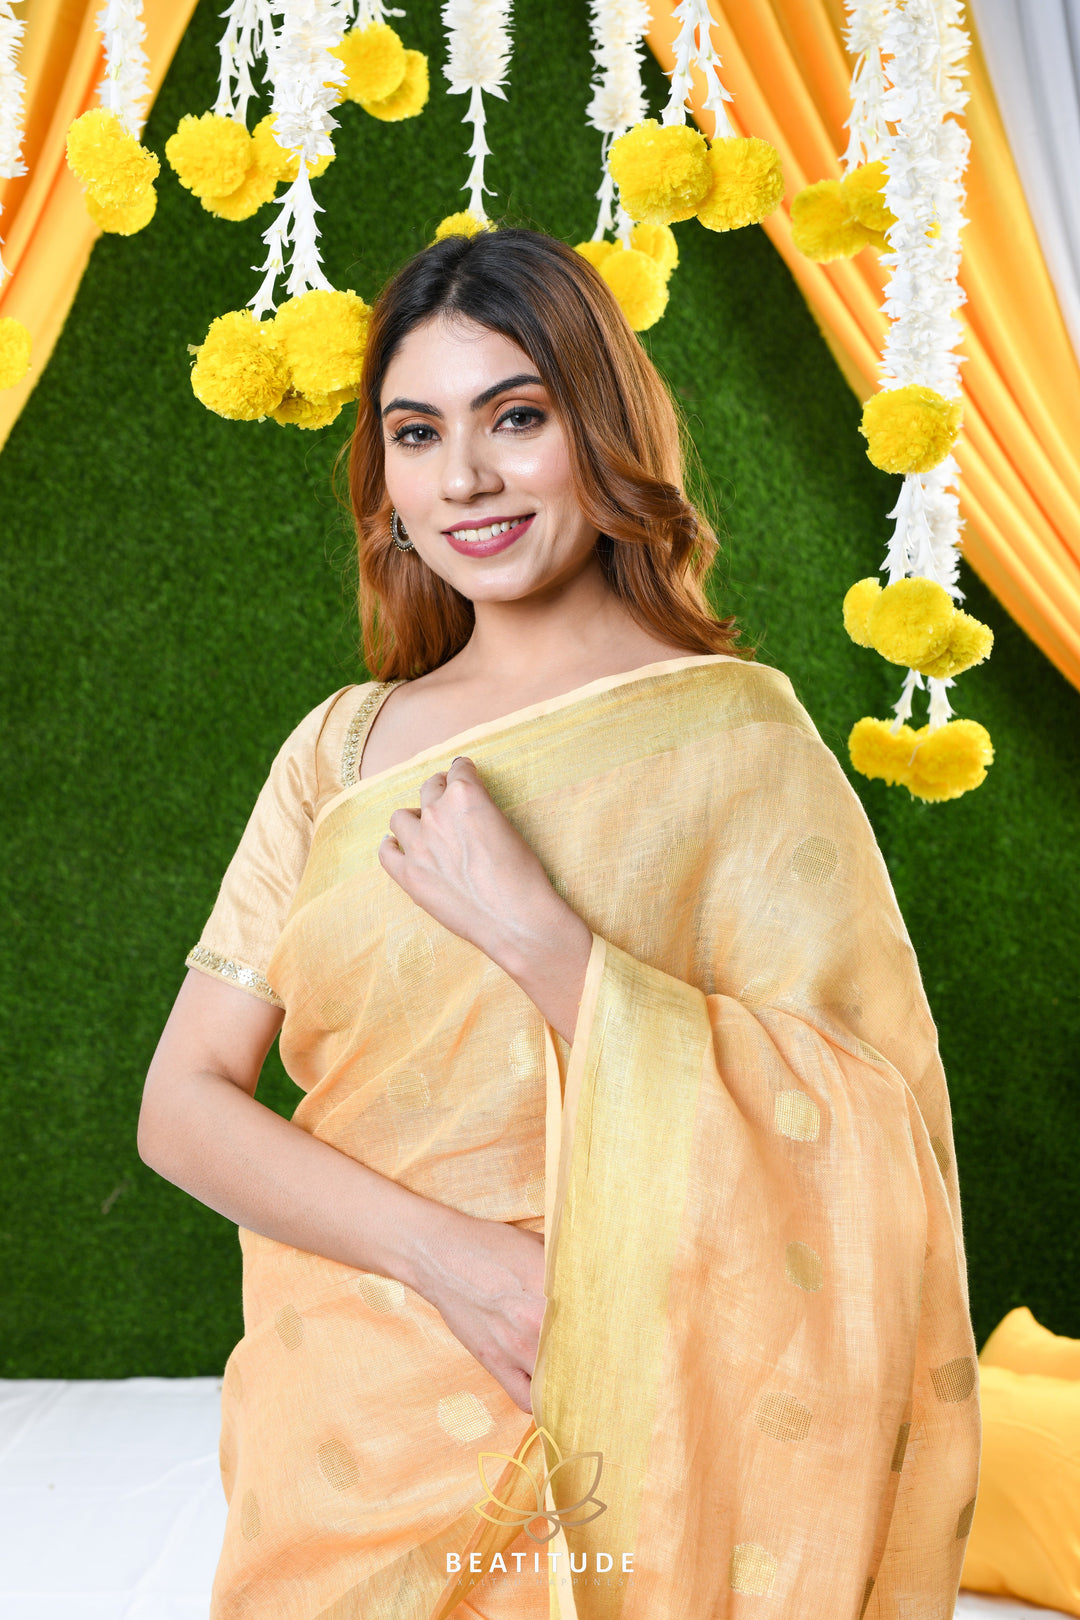 Beatitude Peach Handwoven Linen Saree with Unstitched Blouse Gold Tone Design